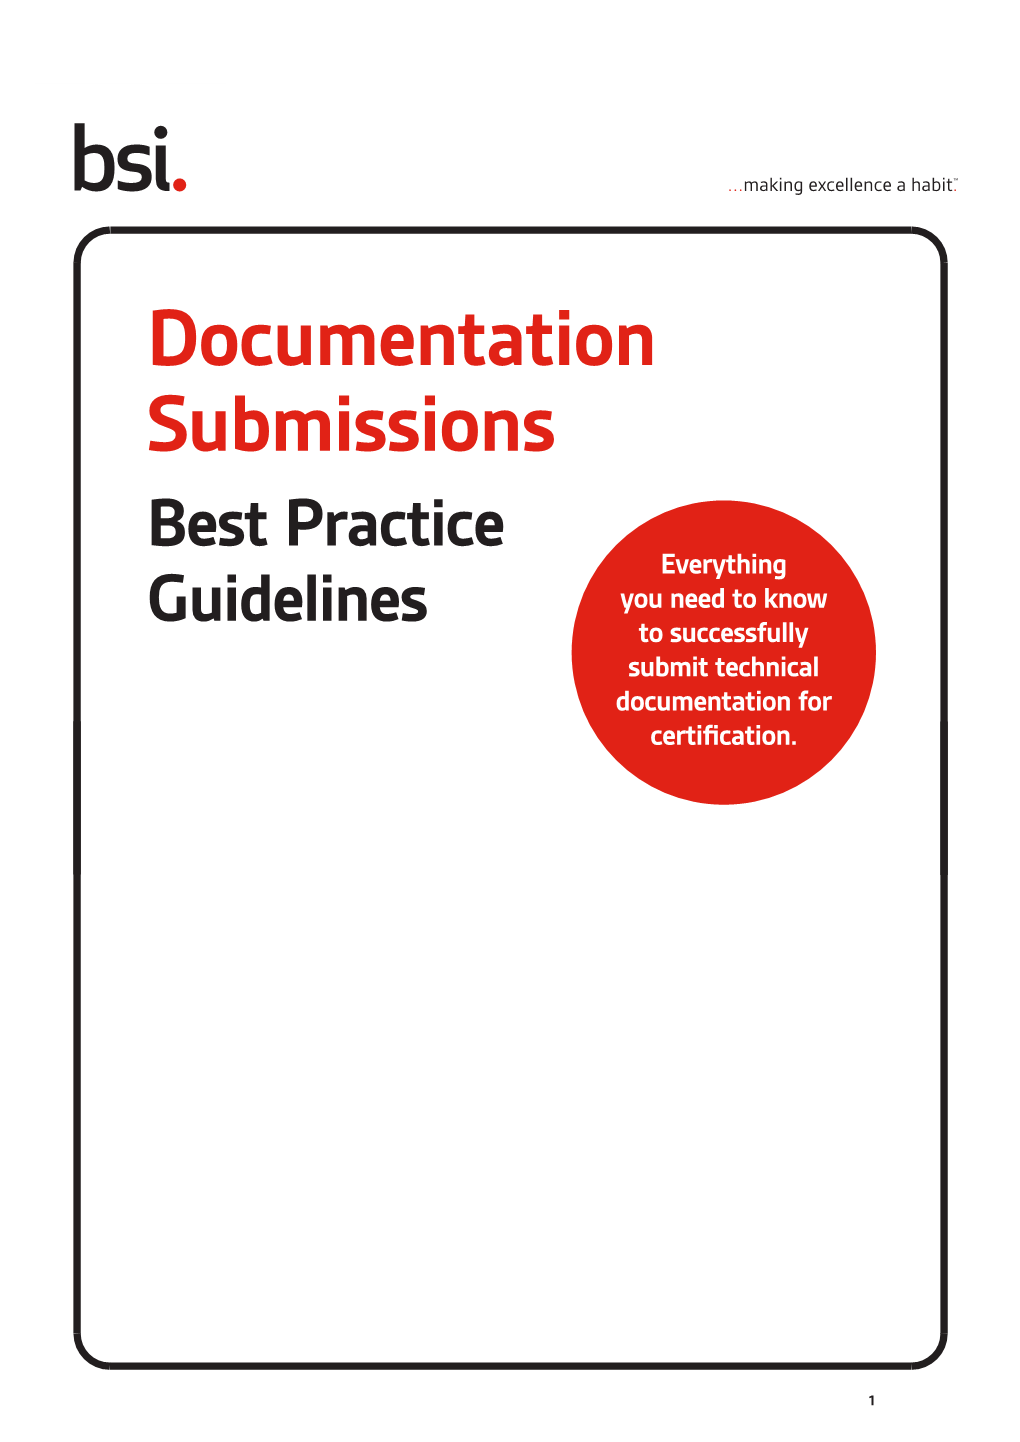 Documentation Submissions Best Practice Everything You Need to Know Guidelines to Successfully Submit Technical Documentation for Certification